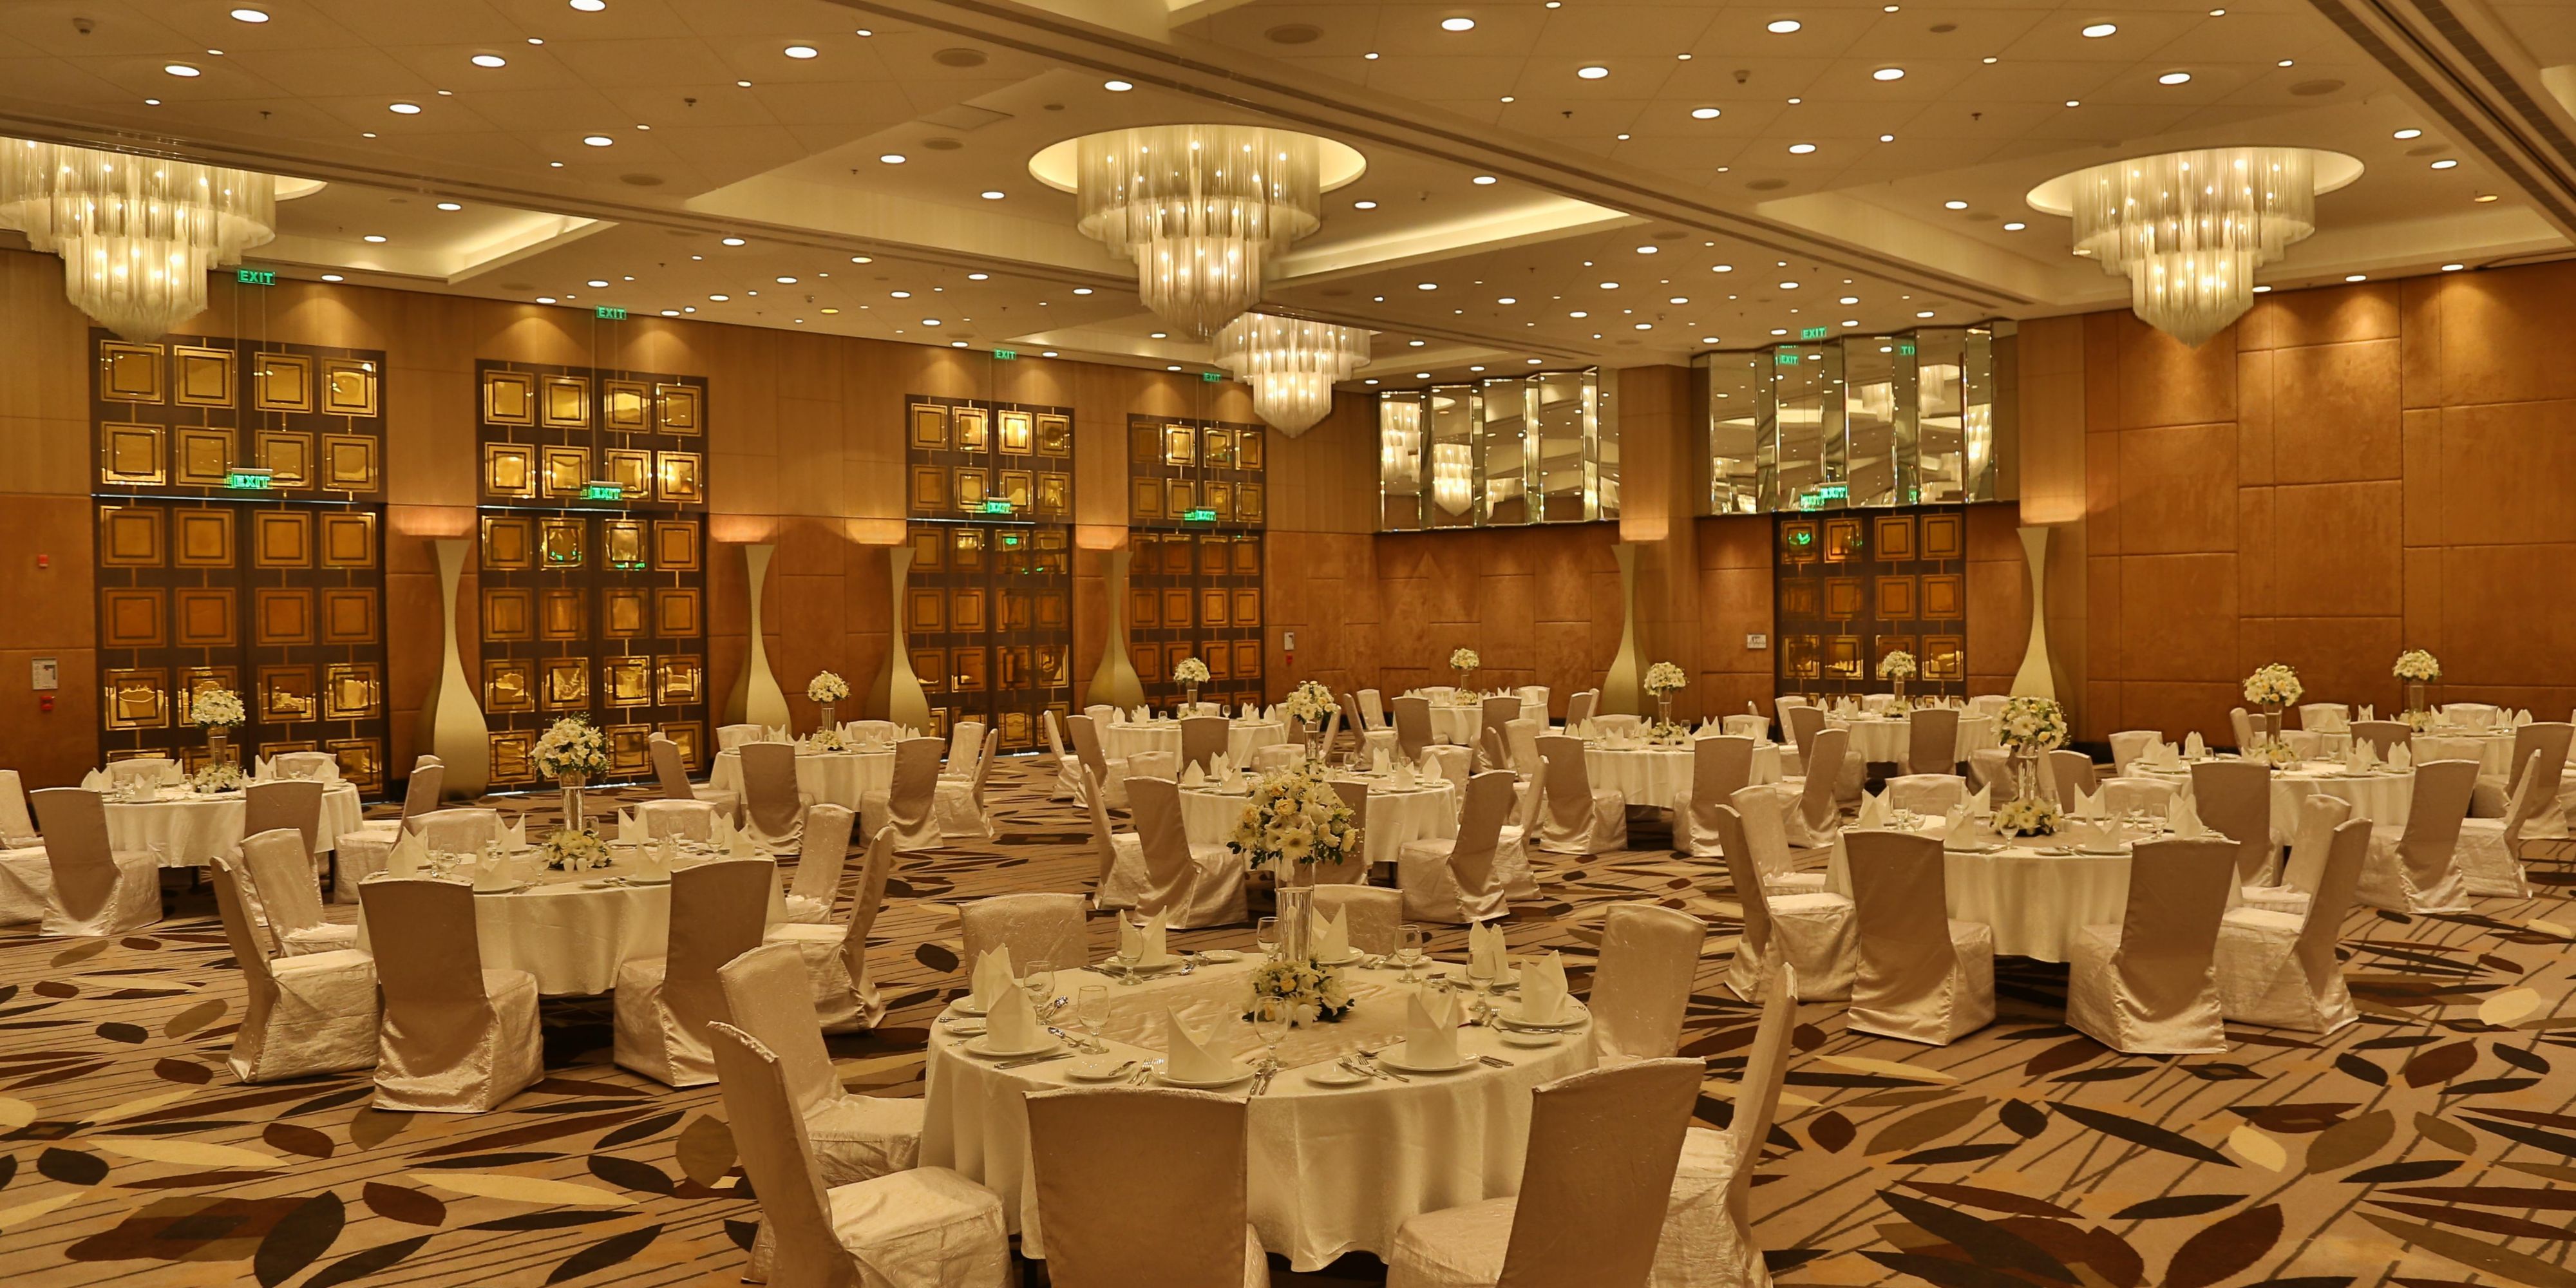 Ruposhi Bangla Grand Ballroom is furnished with a chic and luxurious design with the latest cutting-edge technology measuring 9245 square feet (858.88 sqm.). Our pillarless Grand Ballroom features high ceilings with designer chandeliers, a spacious pre-functioning area overlooking the beautiful garden, and flexible partitioning systems.